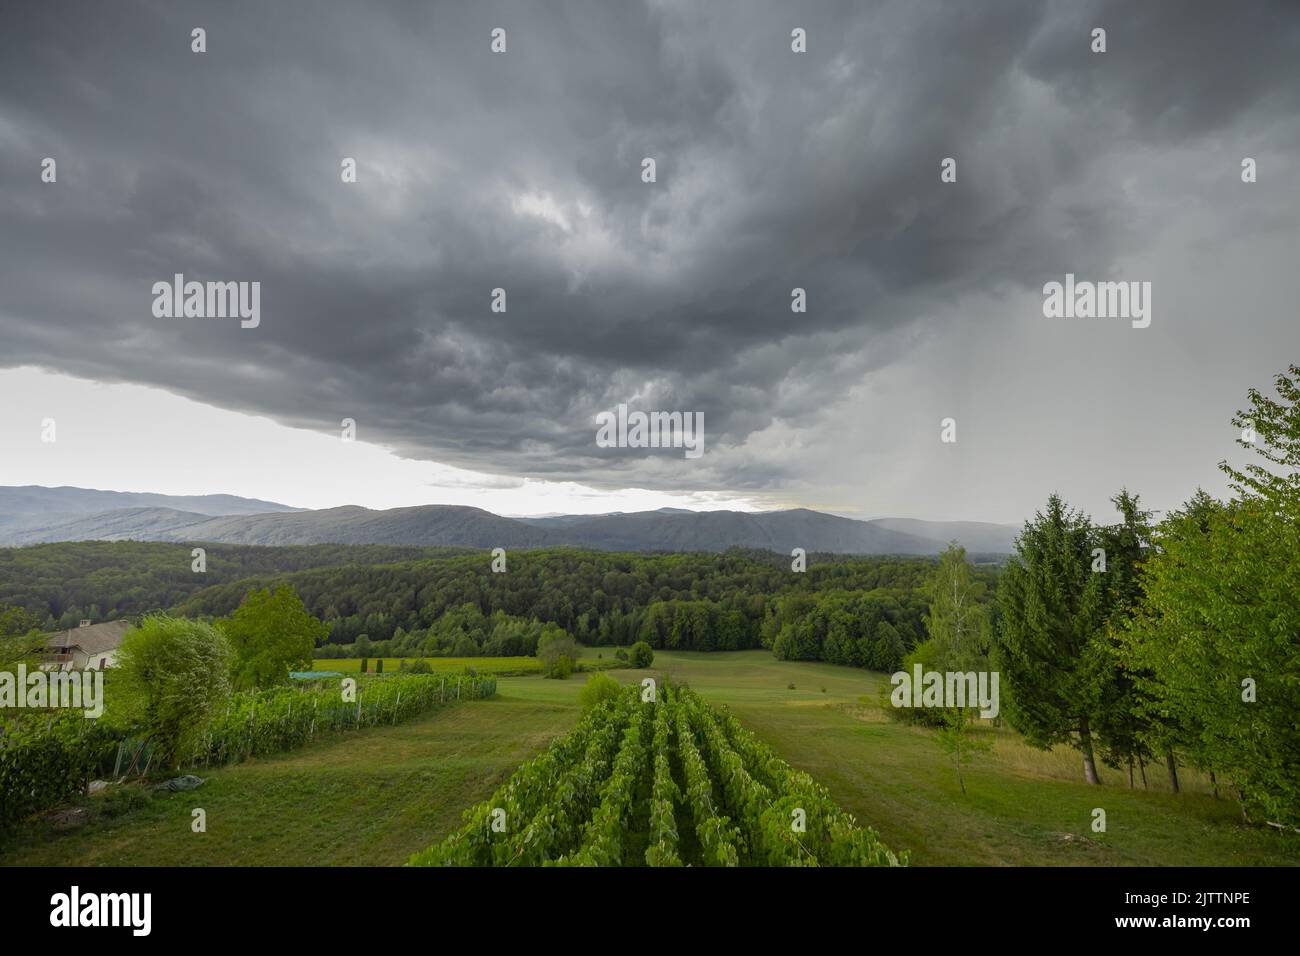 Photo of a wineyard in dolenjska region of slovenia with dense and thick clouds coming over the sky. Rain on the right side visible. Stock Photo